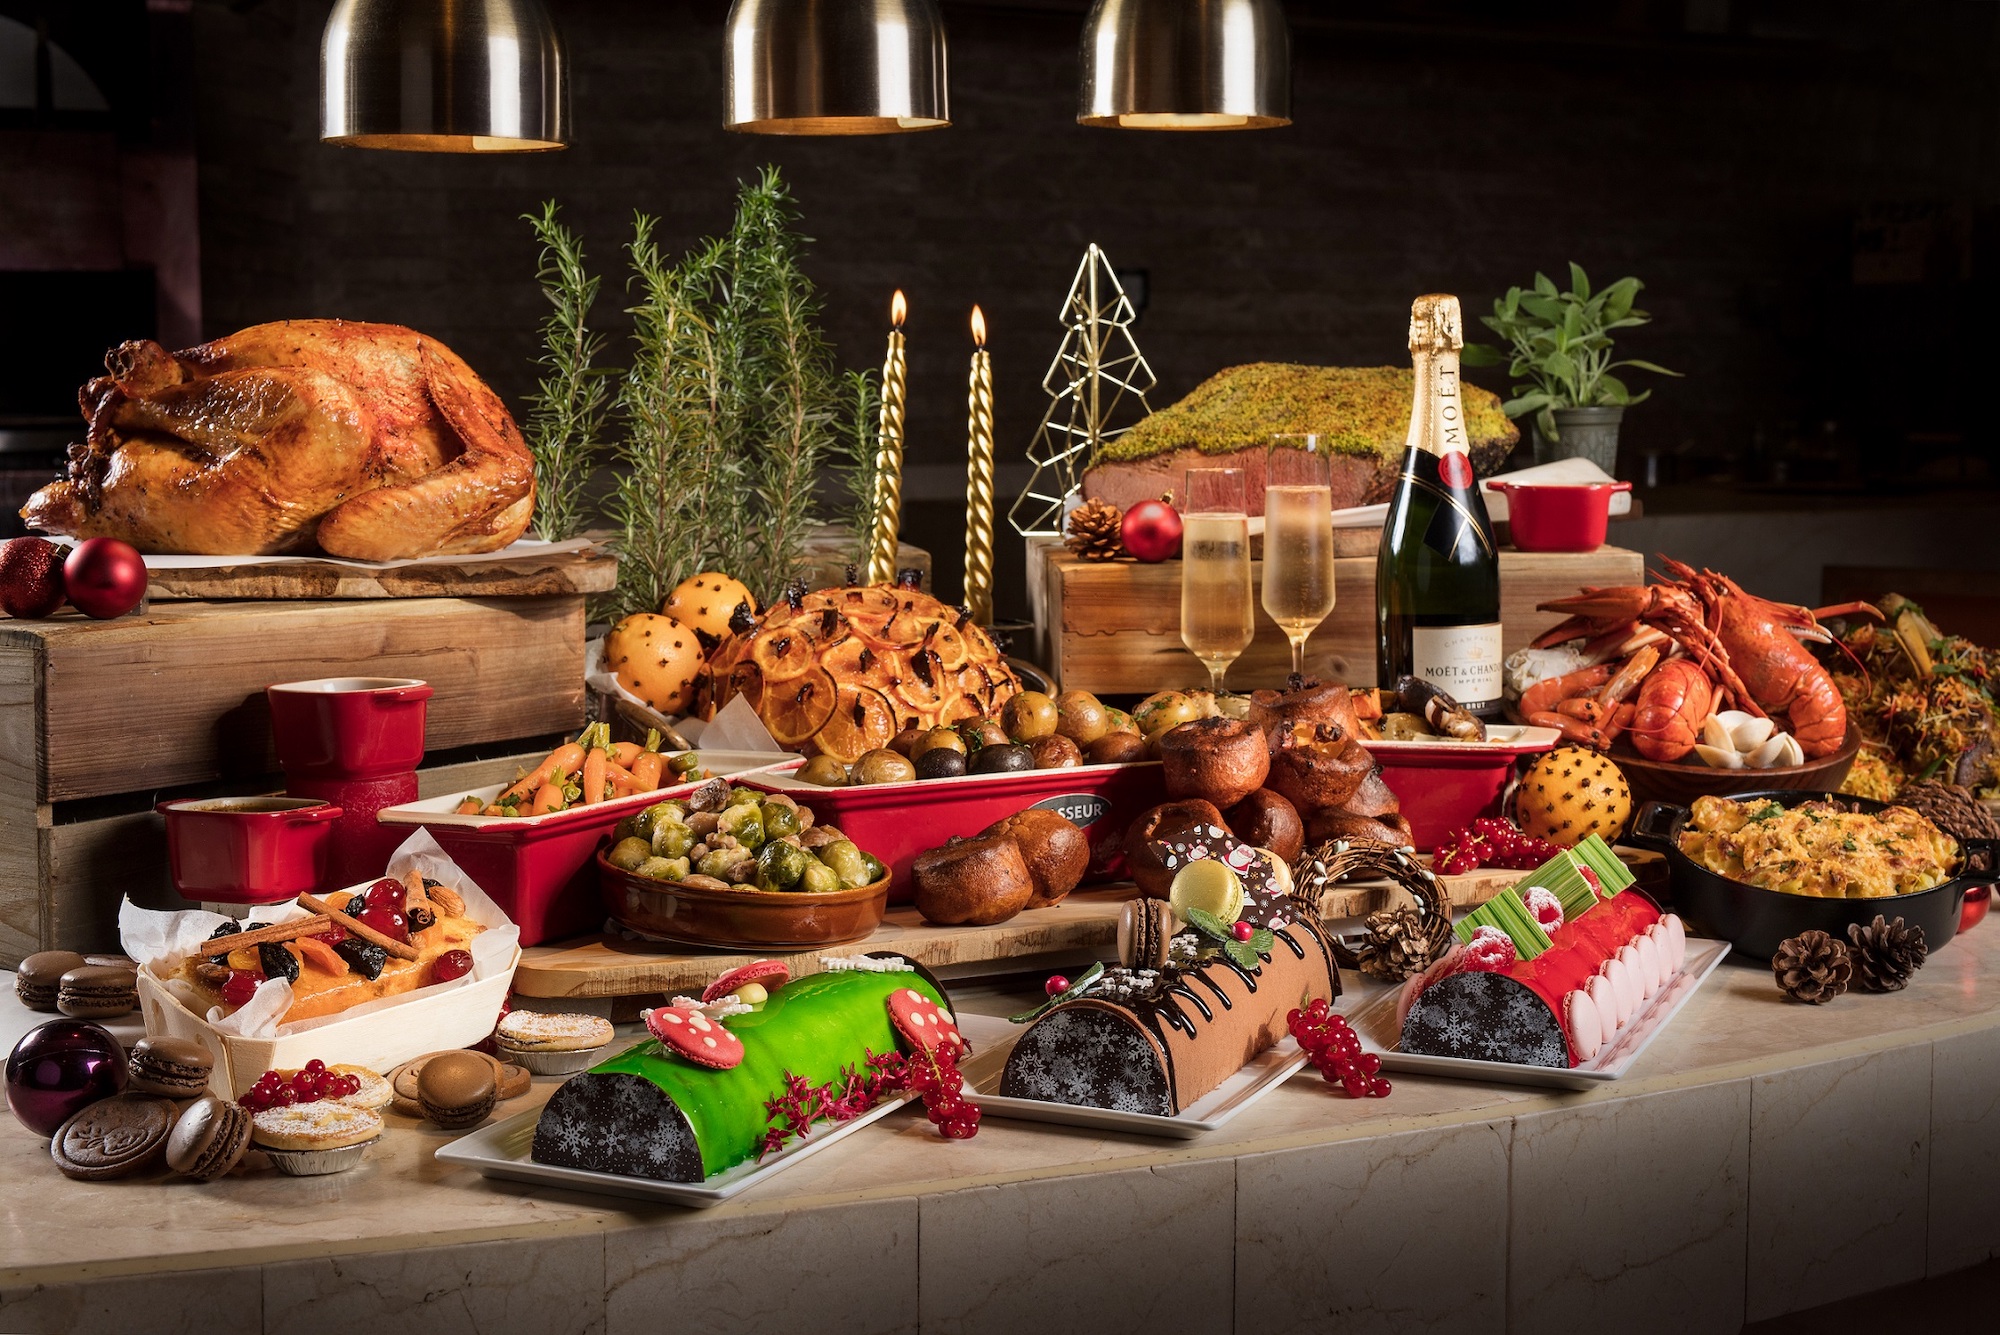 Plan a holiday feast at Sheraton Grand Macao and The St. Regis Macao